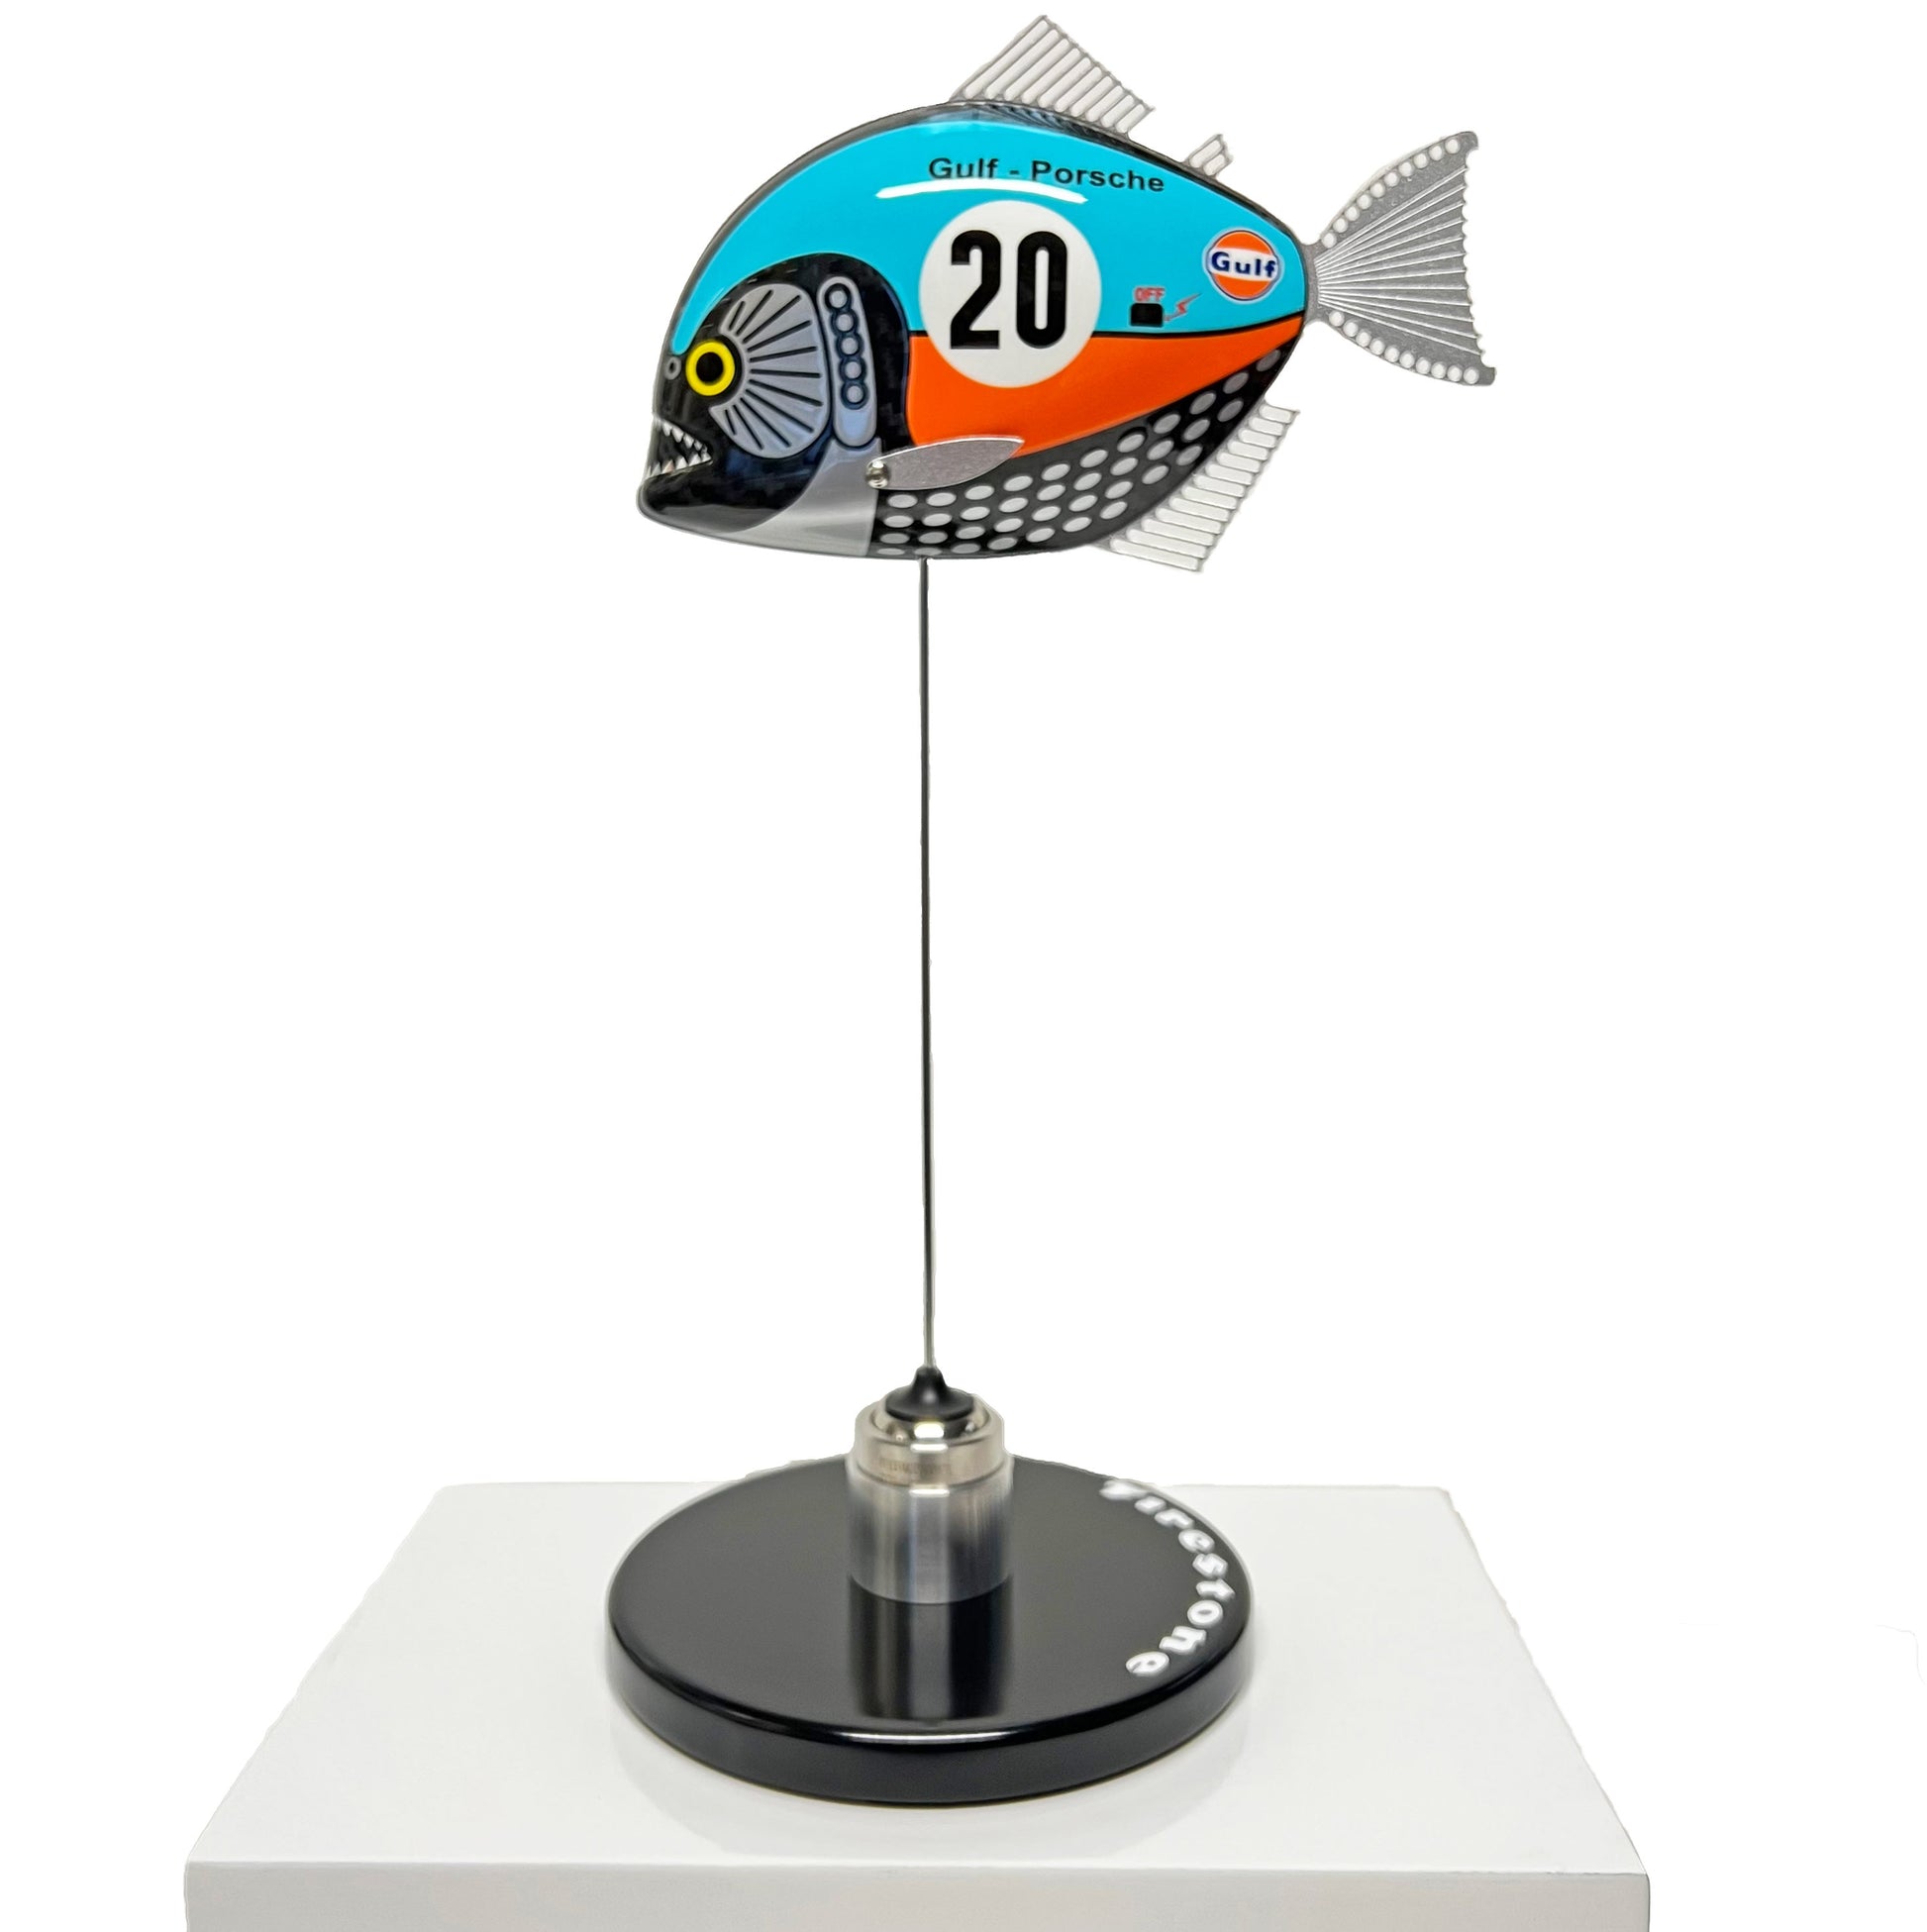 Carbon fibre piranha sculpture with Gulf Porsche Livery on a black base with F1 parts